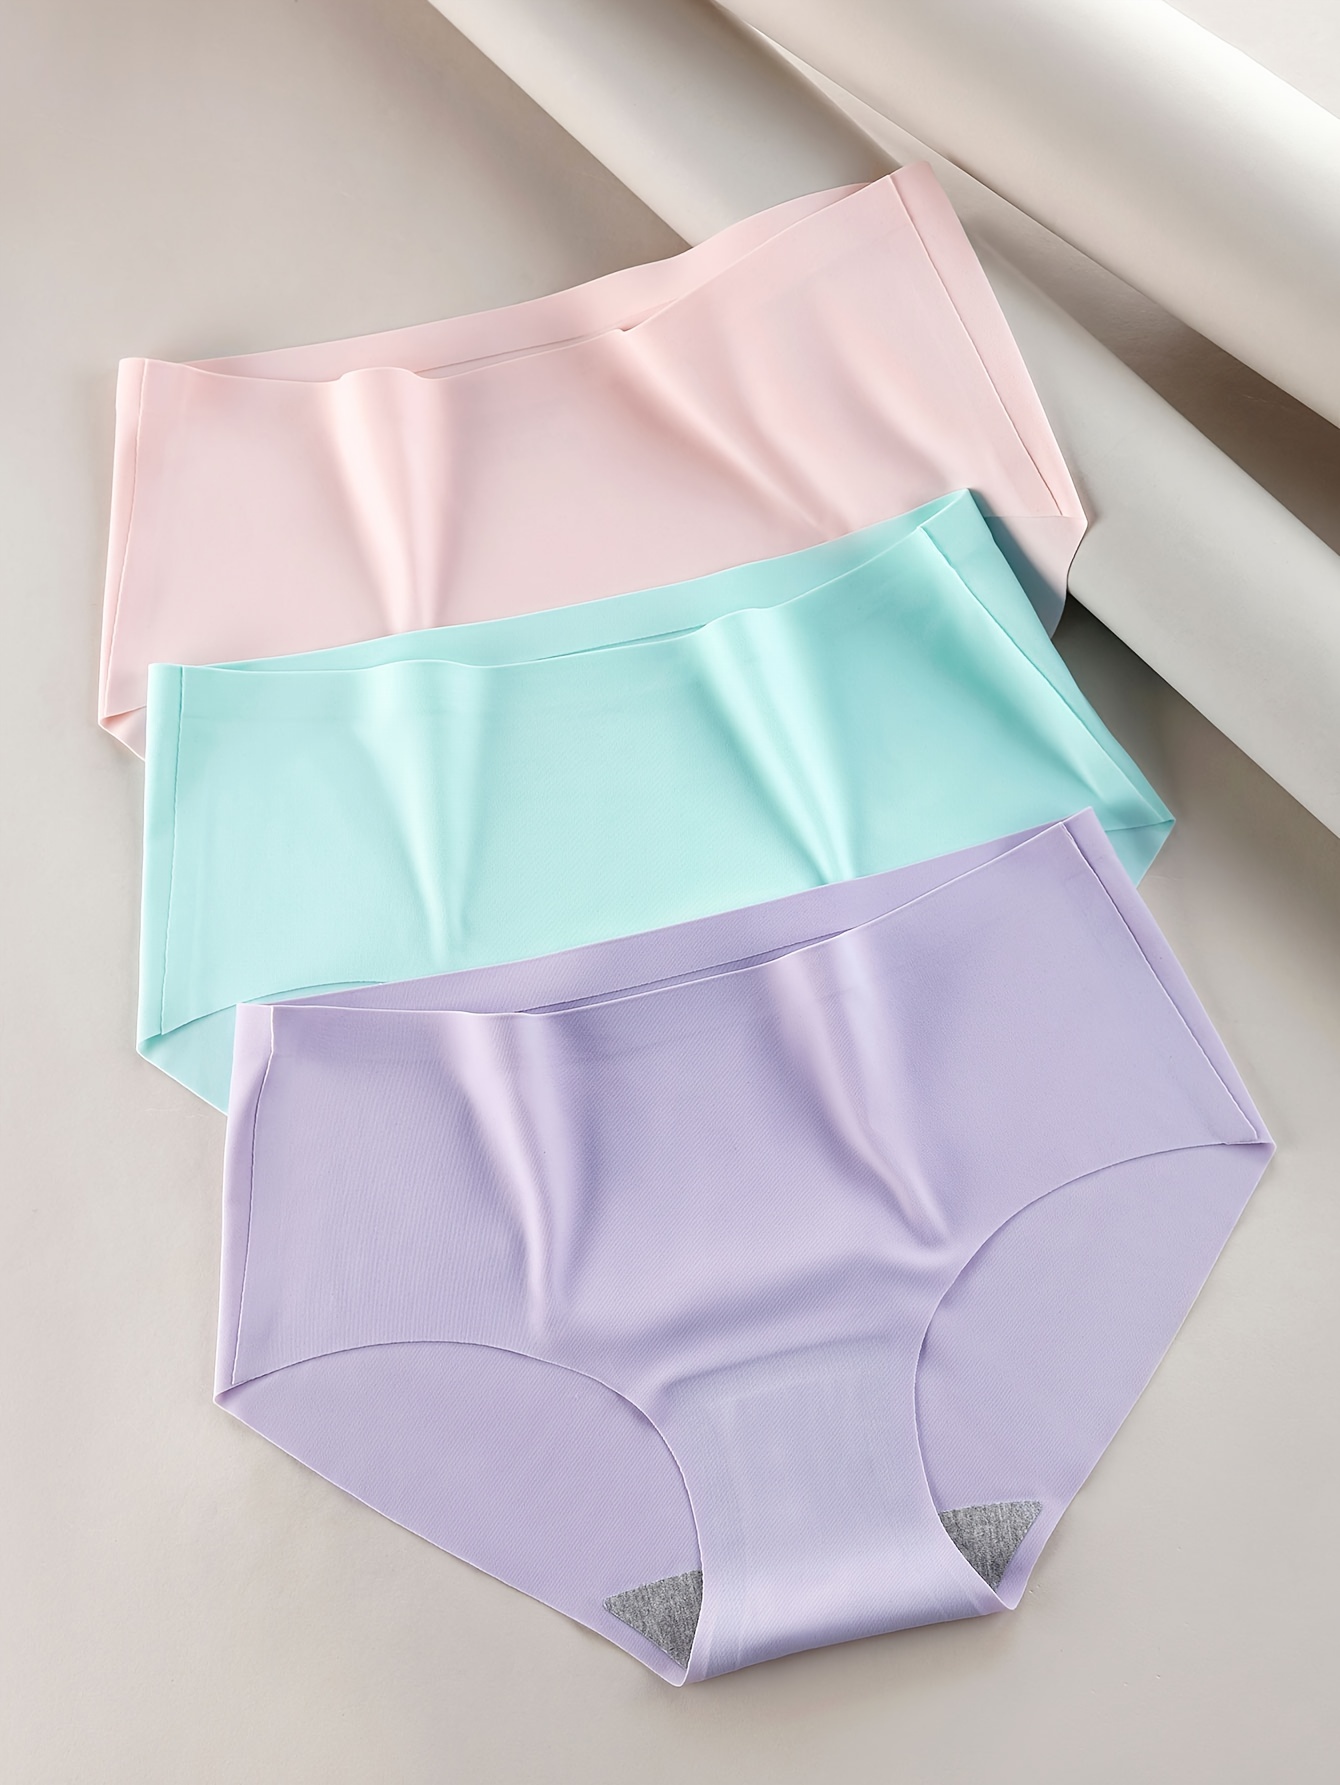 Women's Cotton Underwear Soft Breathable Brieg Ladies Panties - Pack of 4, Shop Today. Get it Tomorrow!